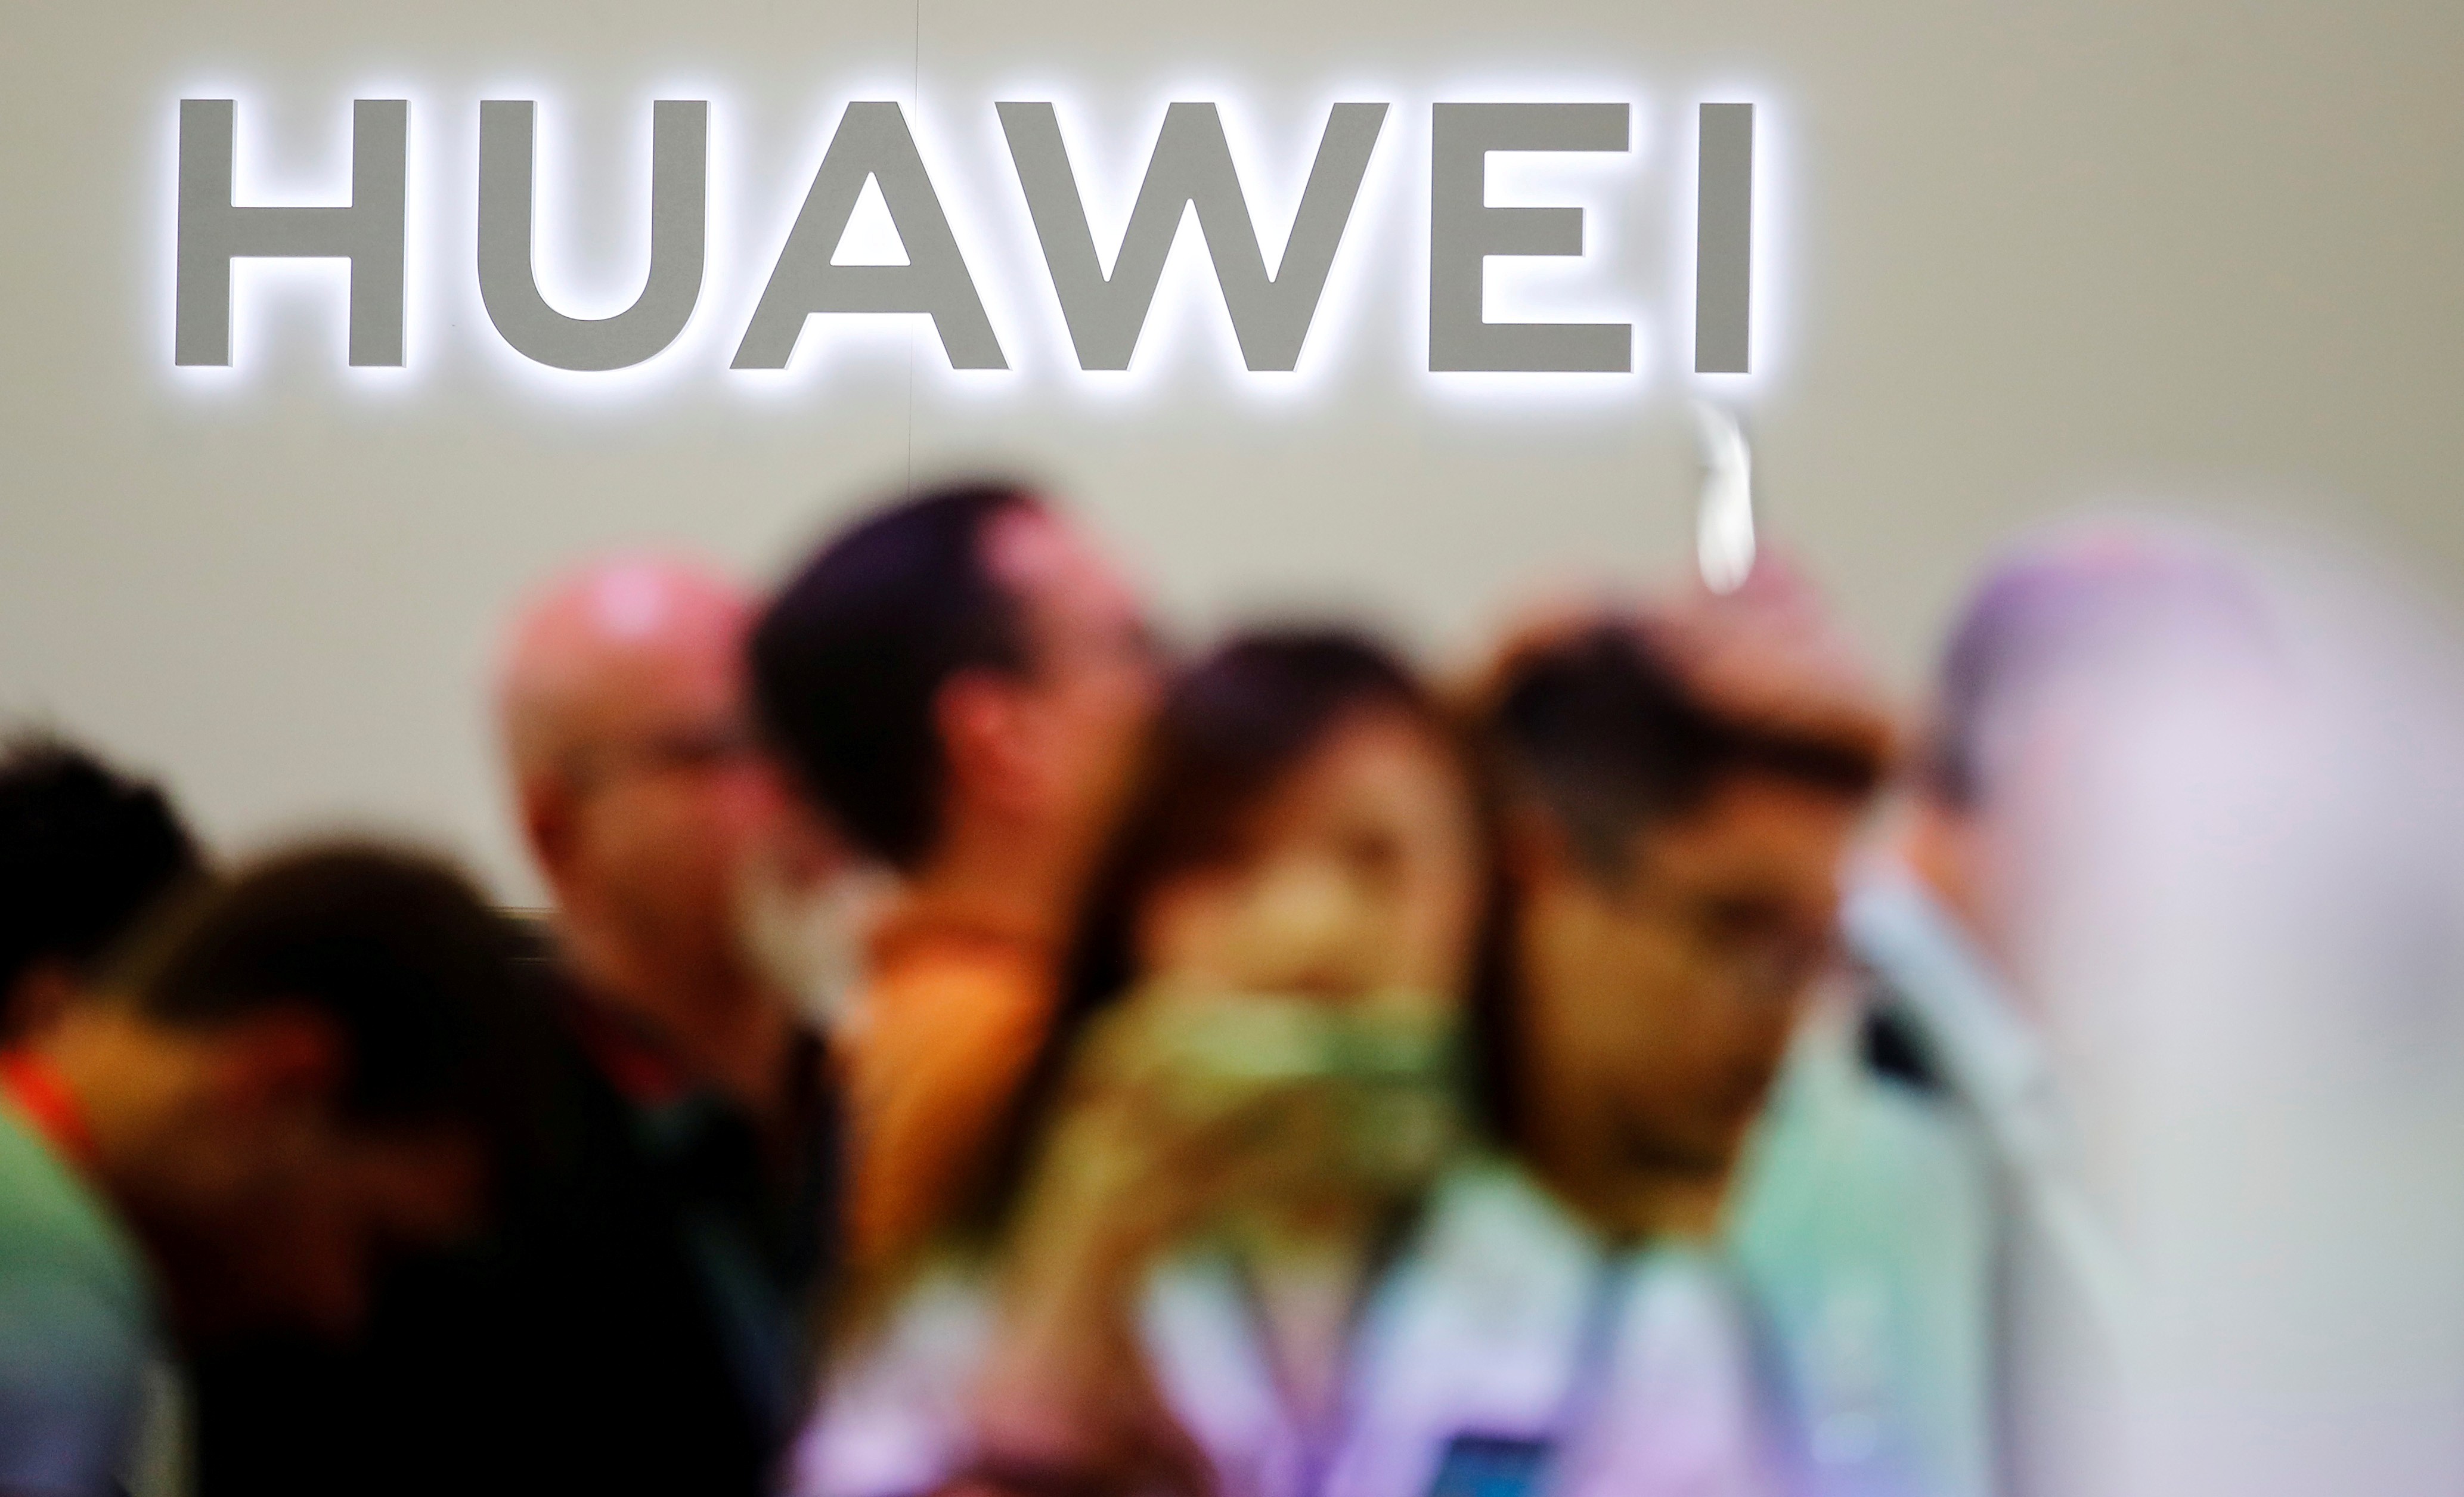 The Huawei logo is pictured at the IFA consumer tech fair in Berlin, Germany, in September 2019. After Xi Jinping came to power, Huawei has lost whatever autonomy it may have enjoyed. Photo: Reuters